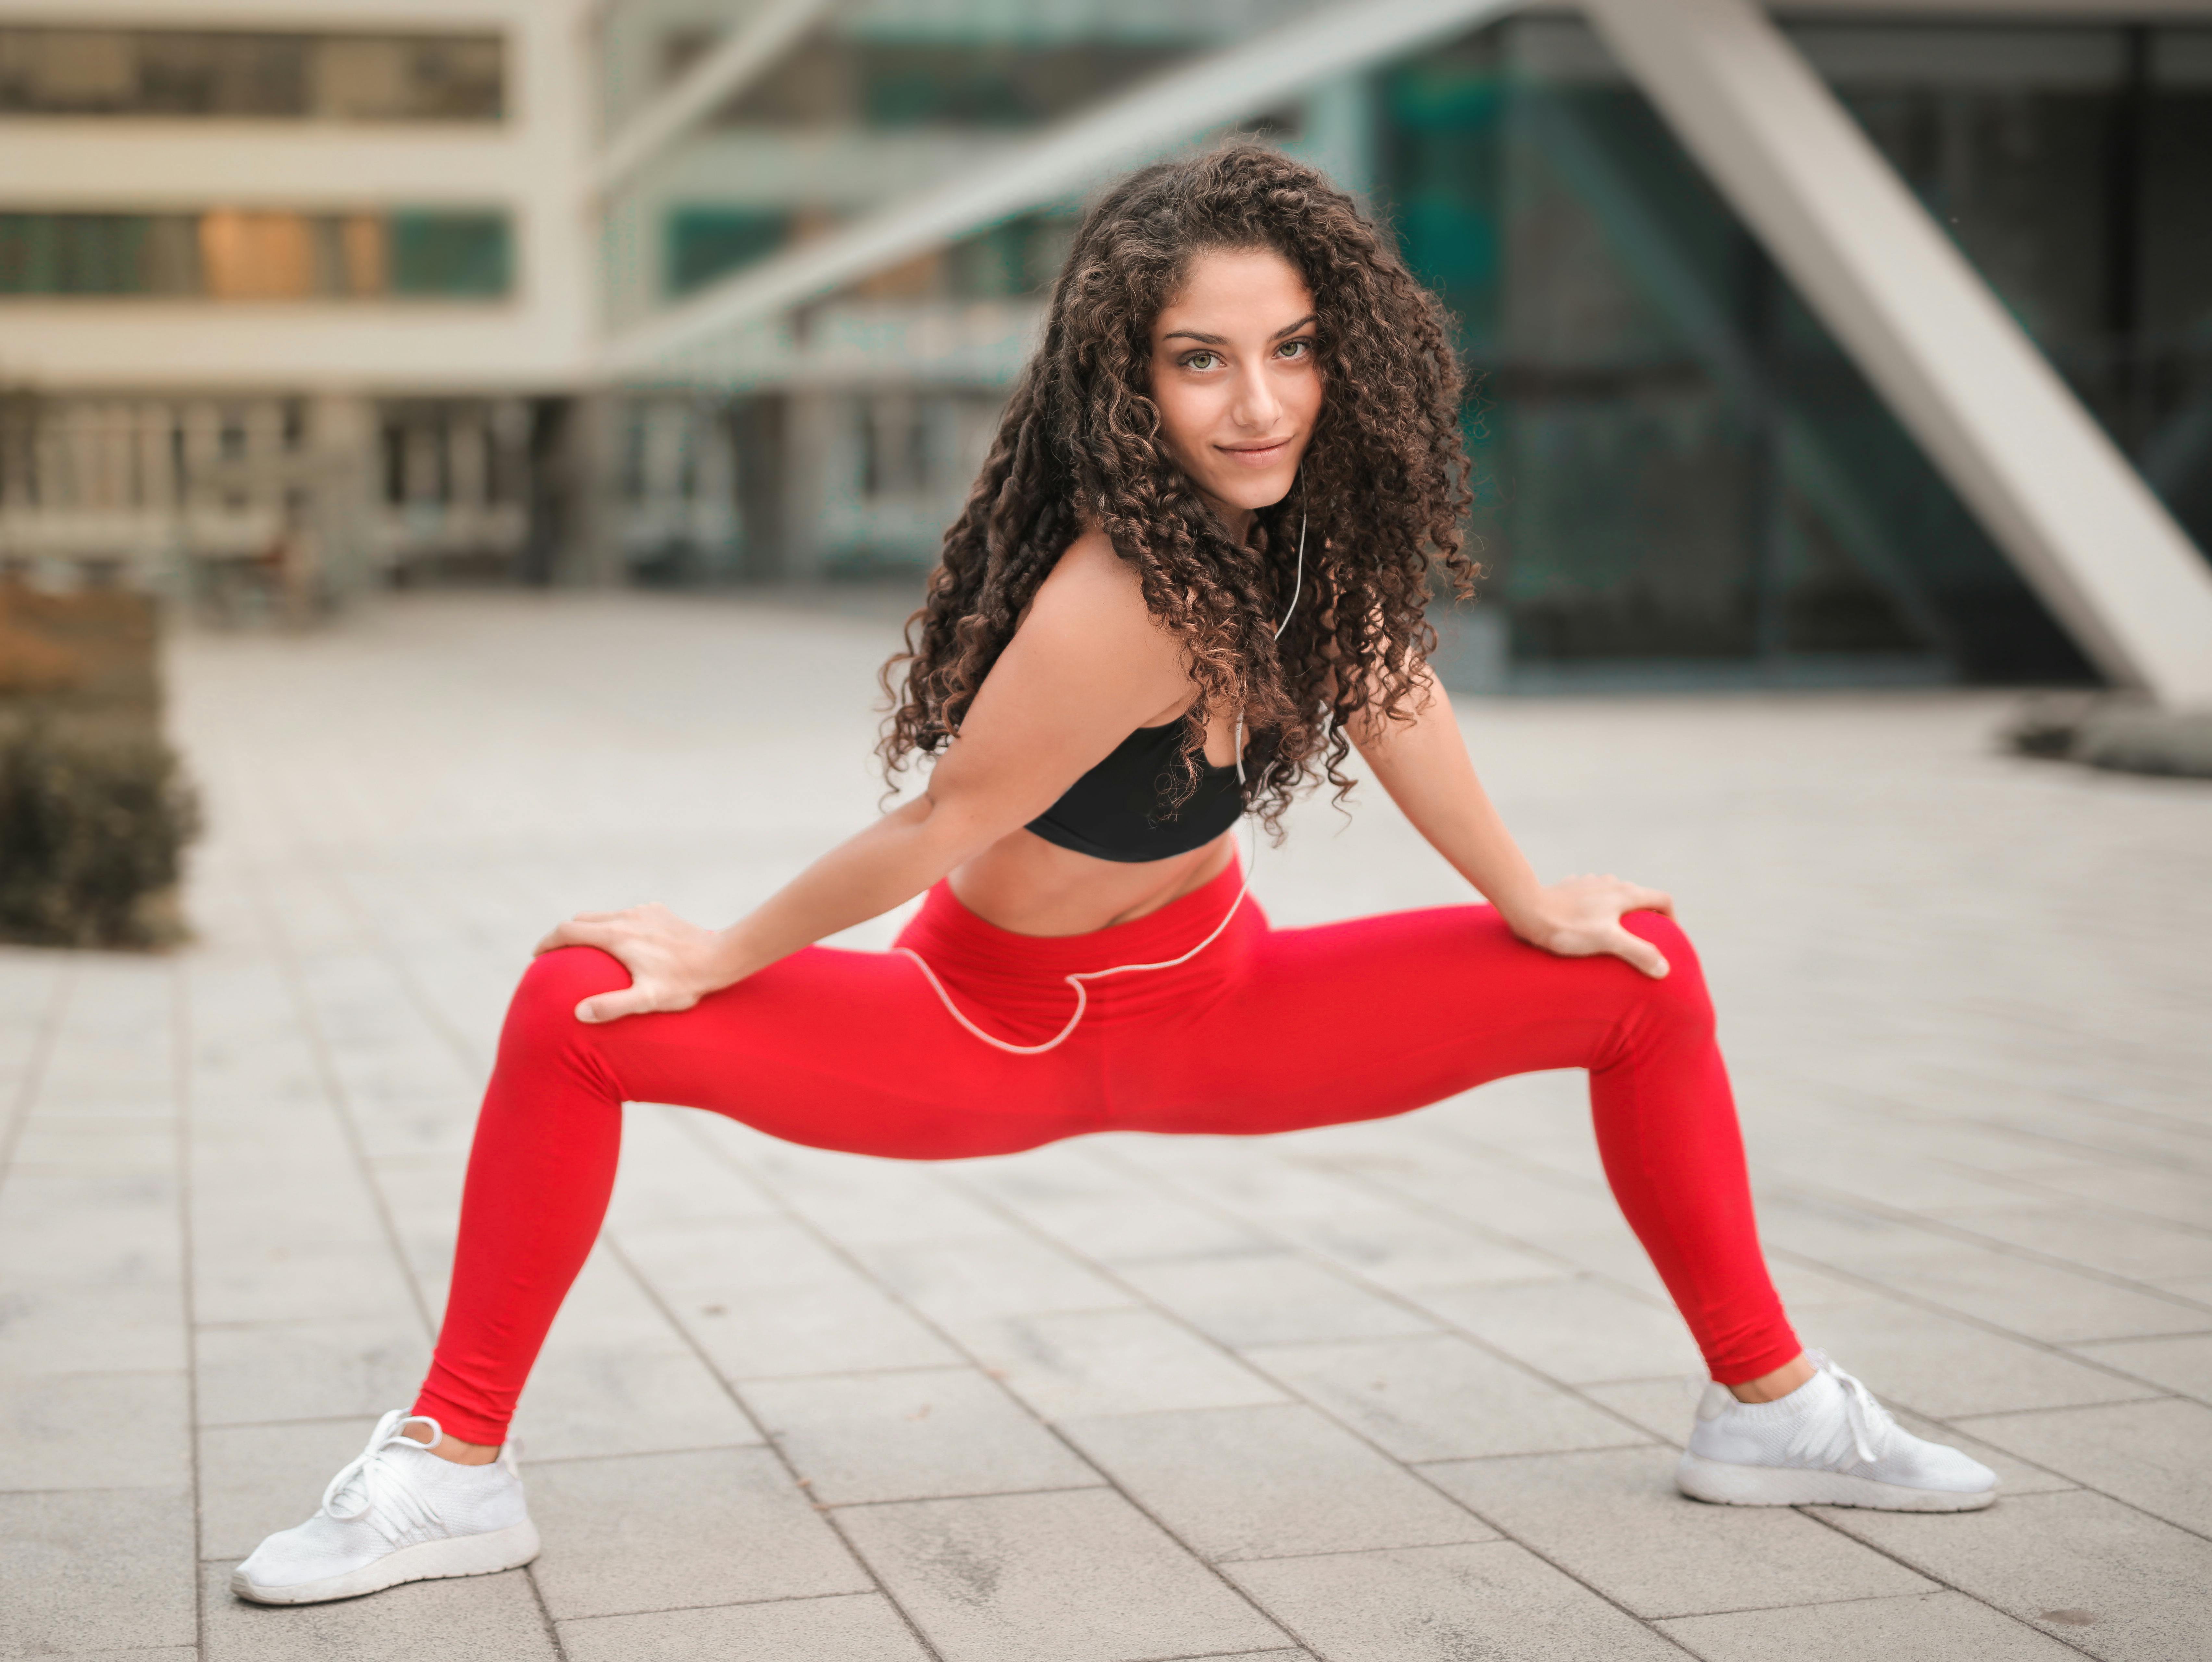 Shop Prisma's Apple Red Capri Leggings for Comfortable and Stylish Workout  Wear